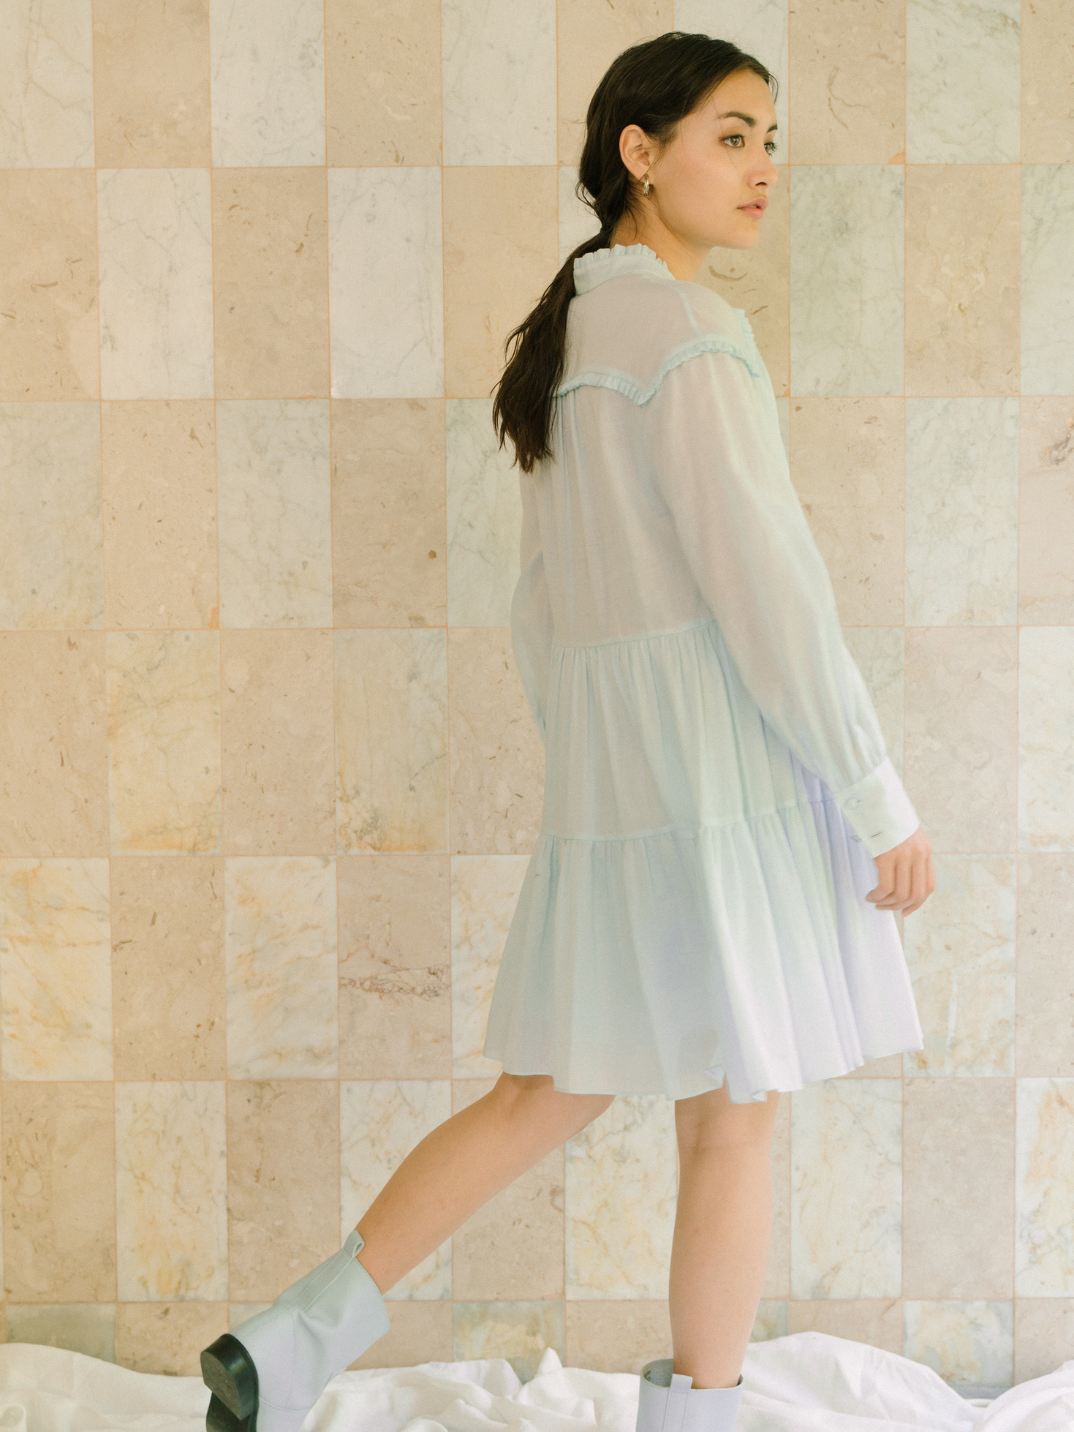 Sophia dress in Maya Blue upcycled from deadstock fabric sustainable fashion brand Hong Kong light blue flowy summer/spring dress